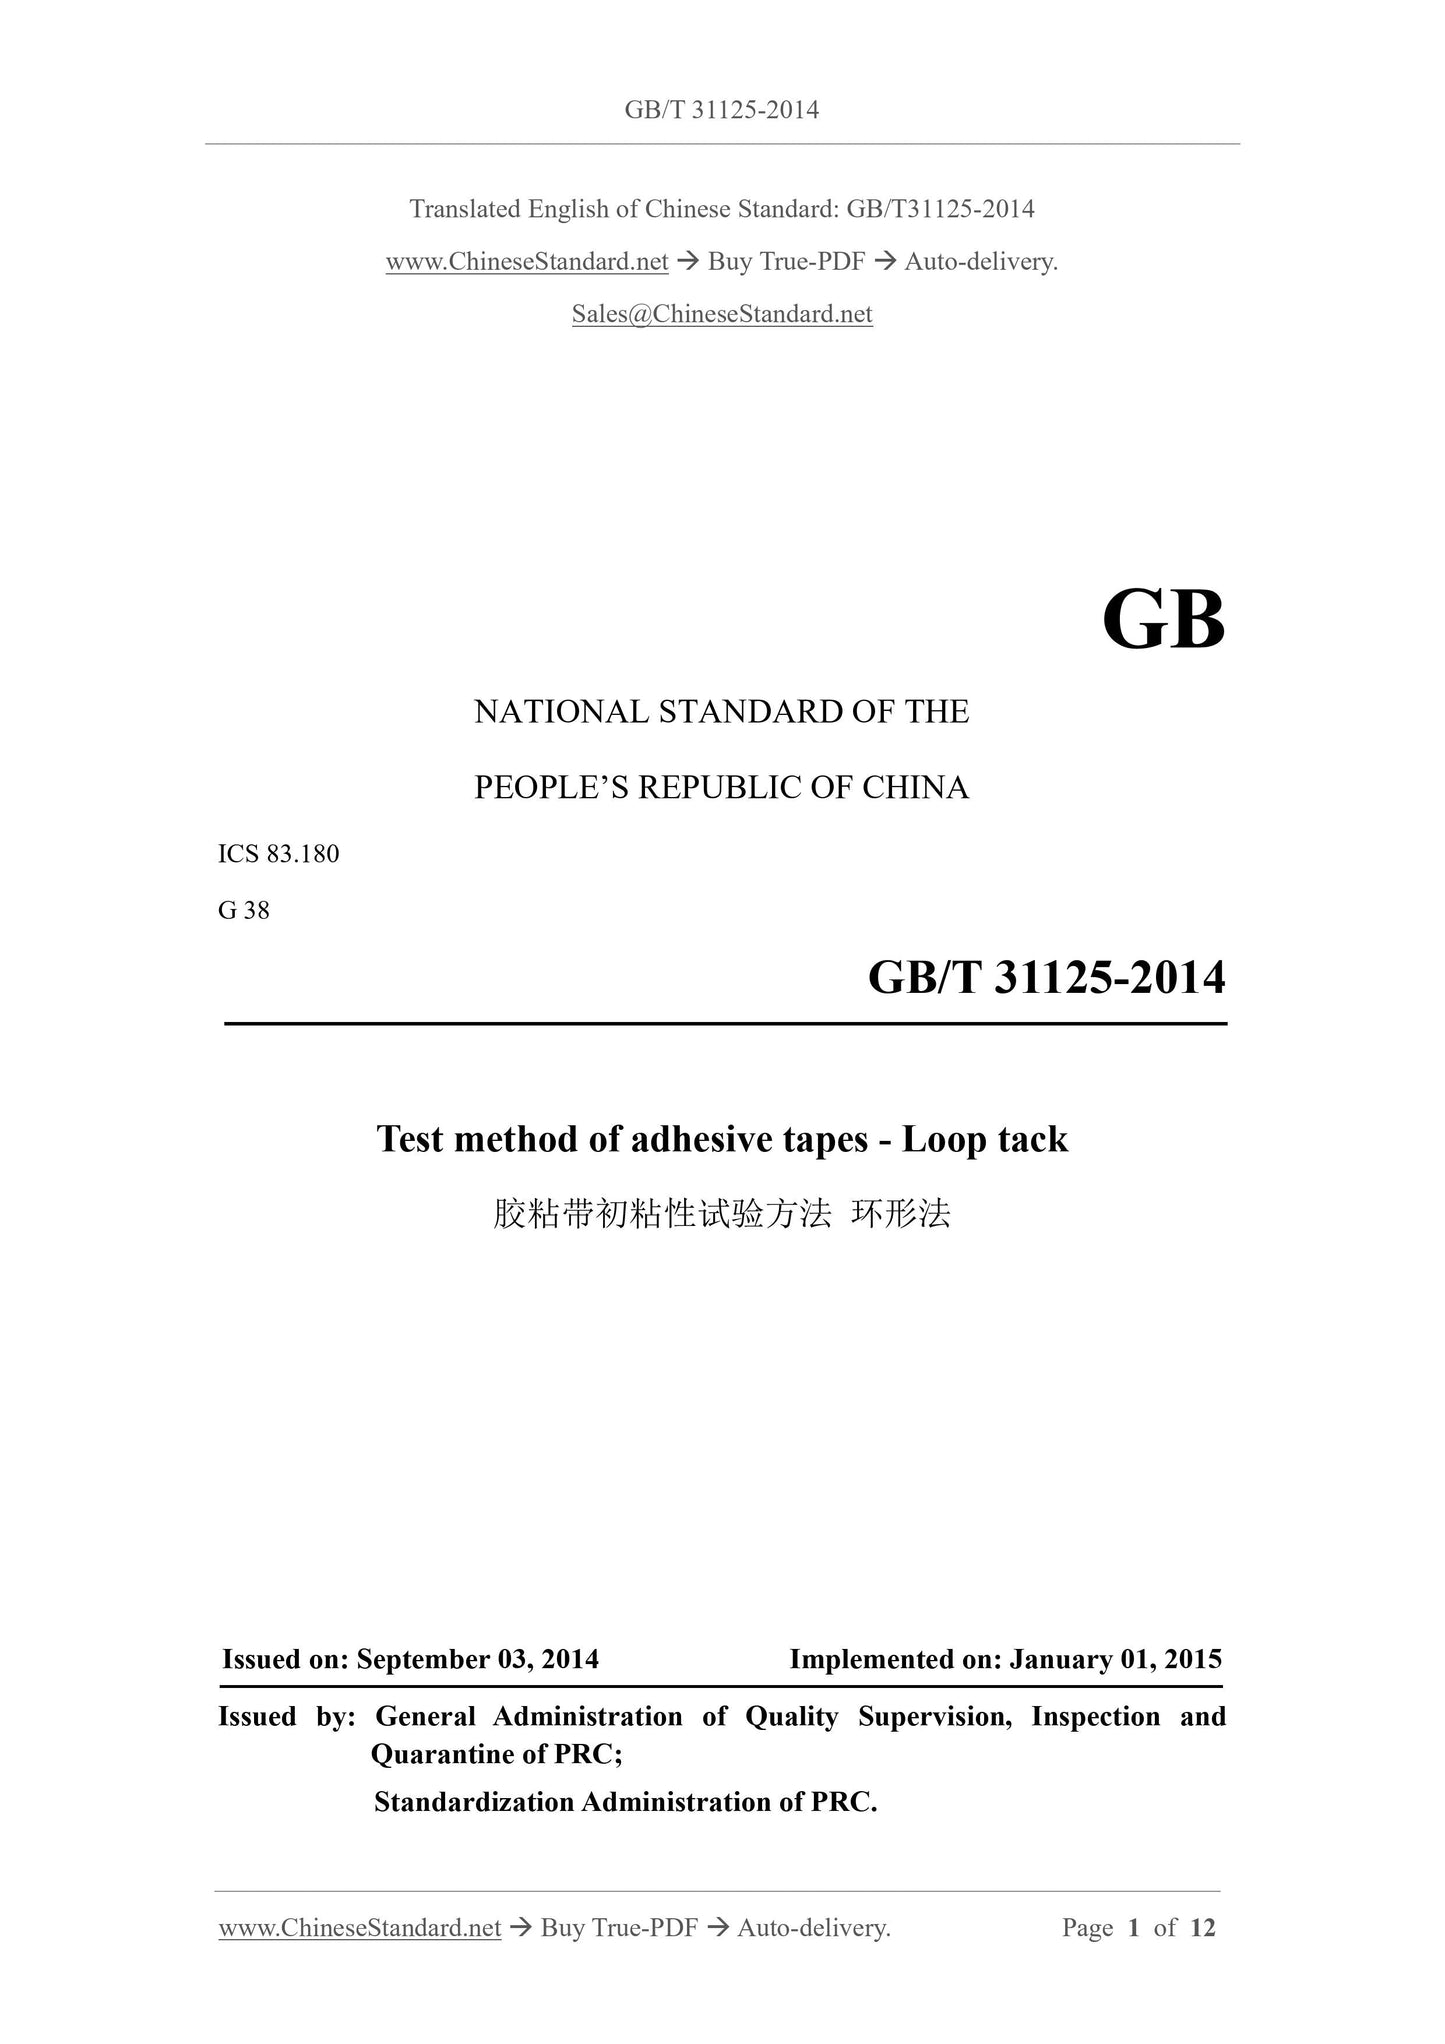 GB/T 31125-2014 Page 1